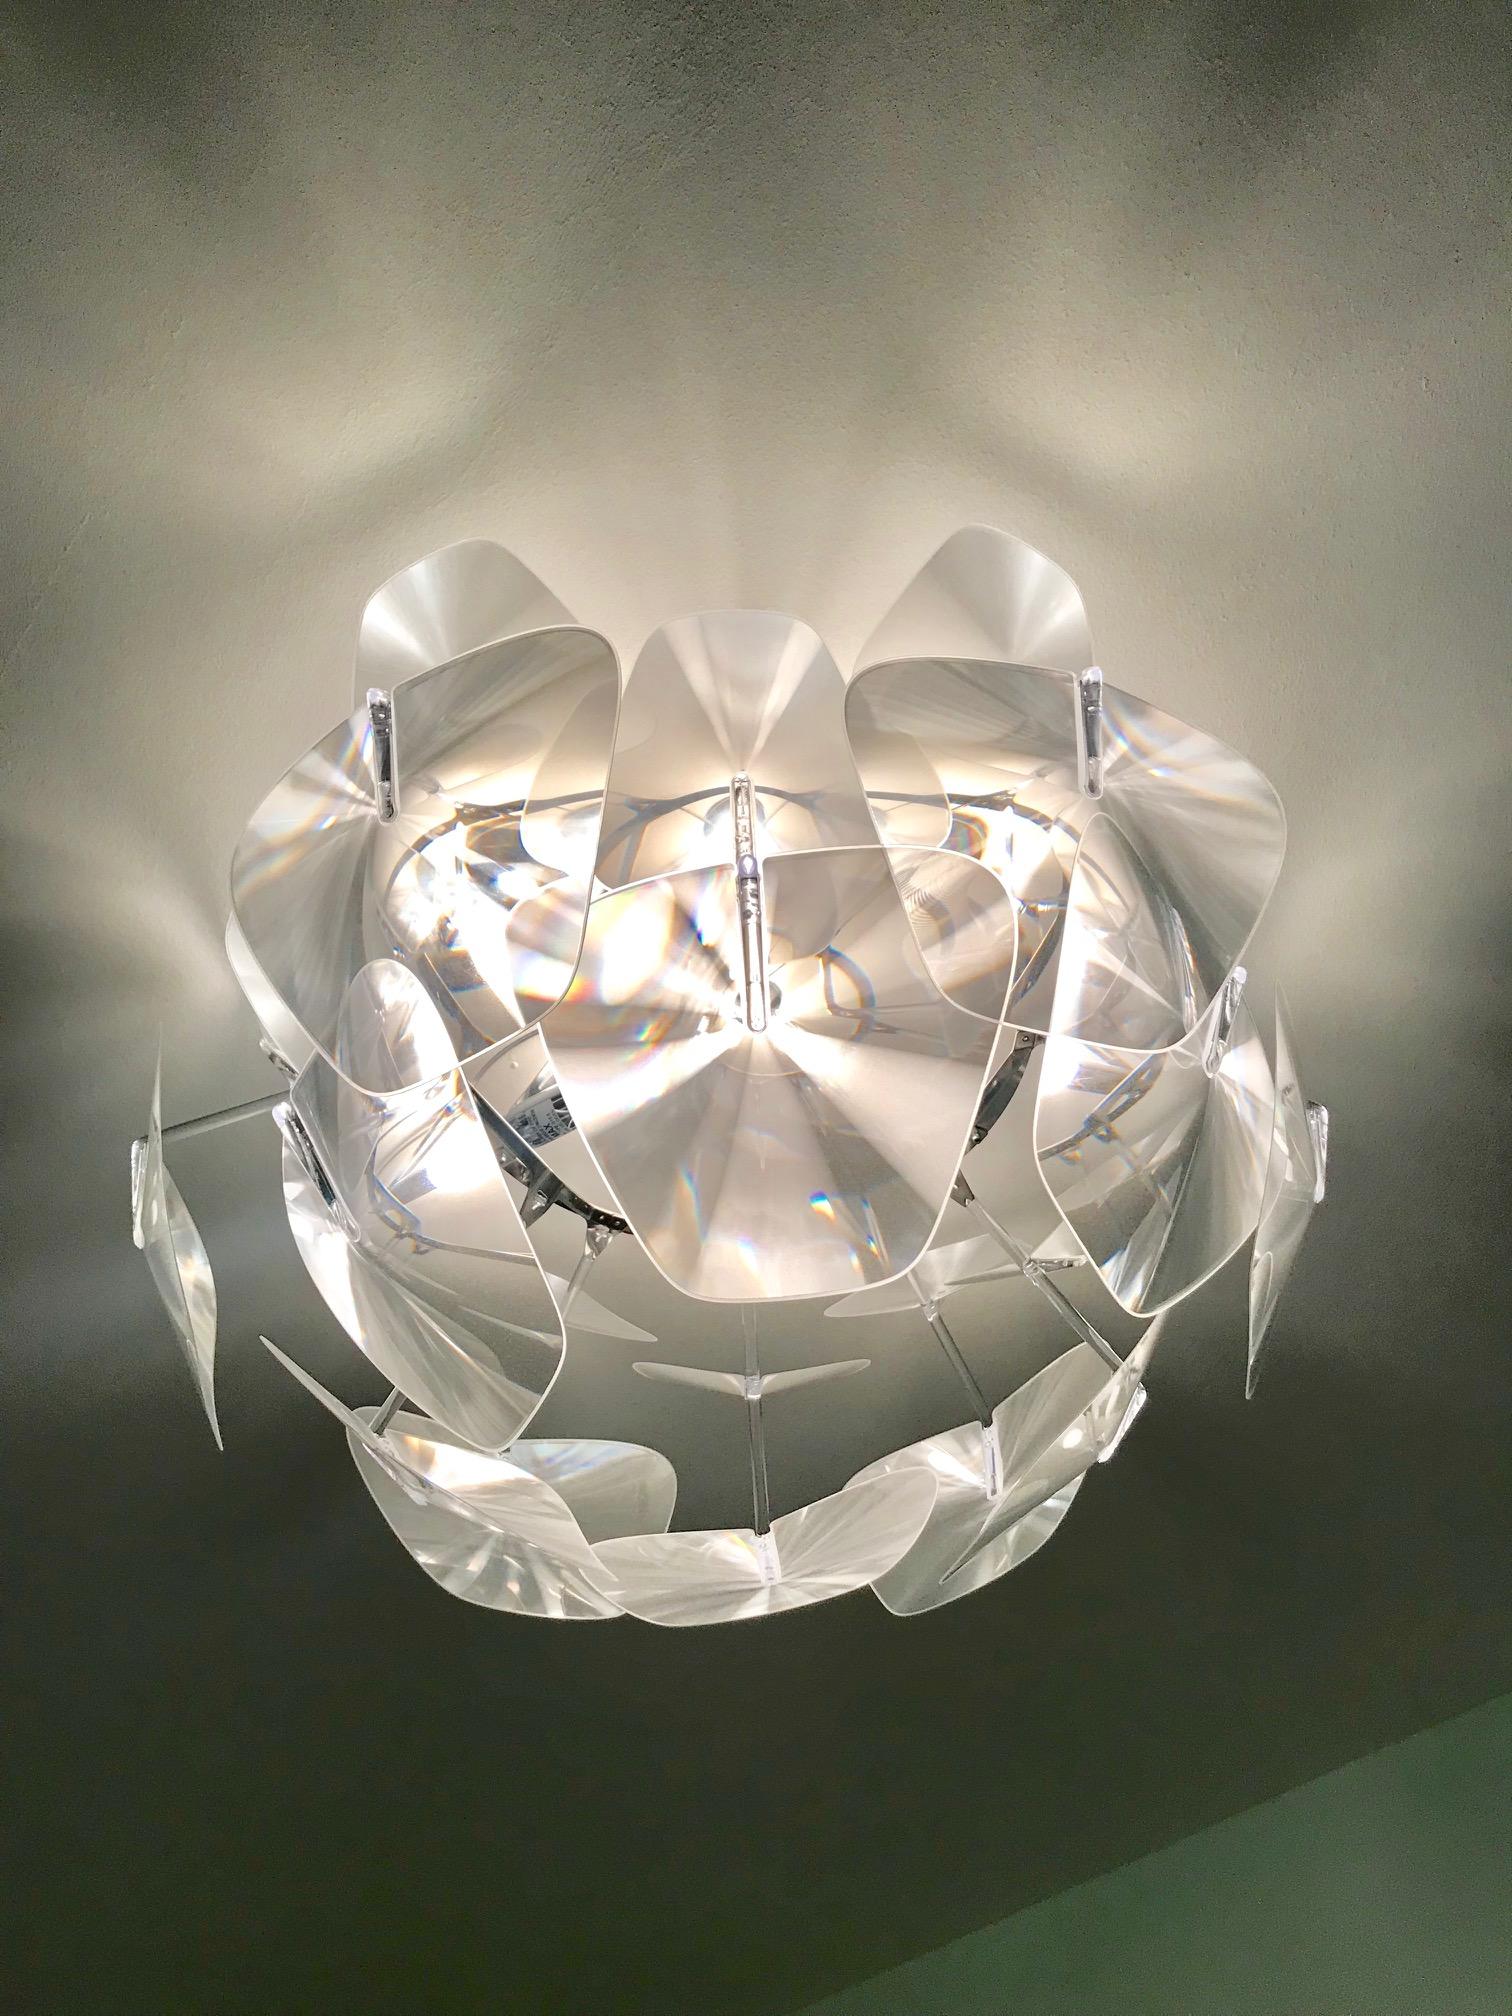 Italian Hope Modernist Ceiling Light with Reflective Prisms by Luceplan, Italy 2018